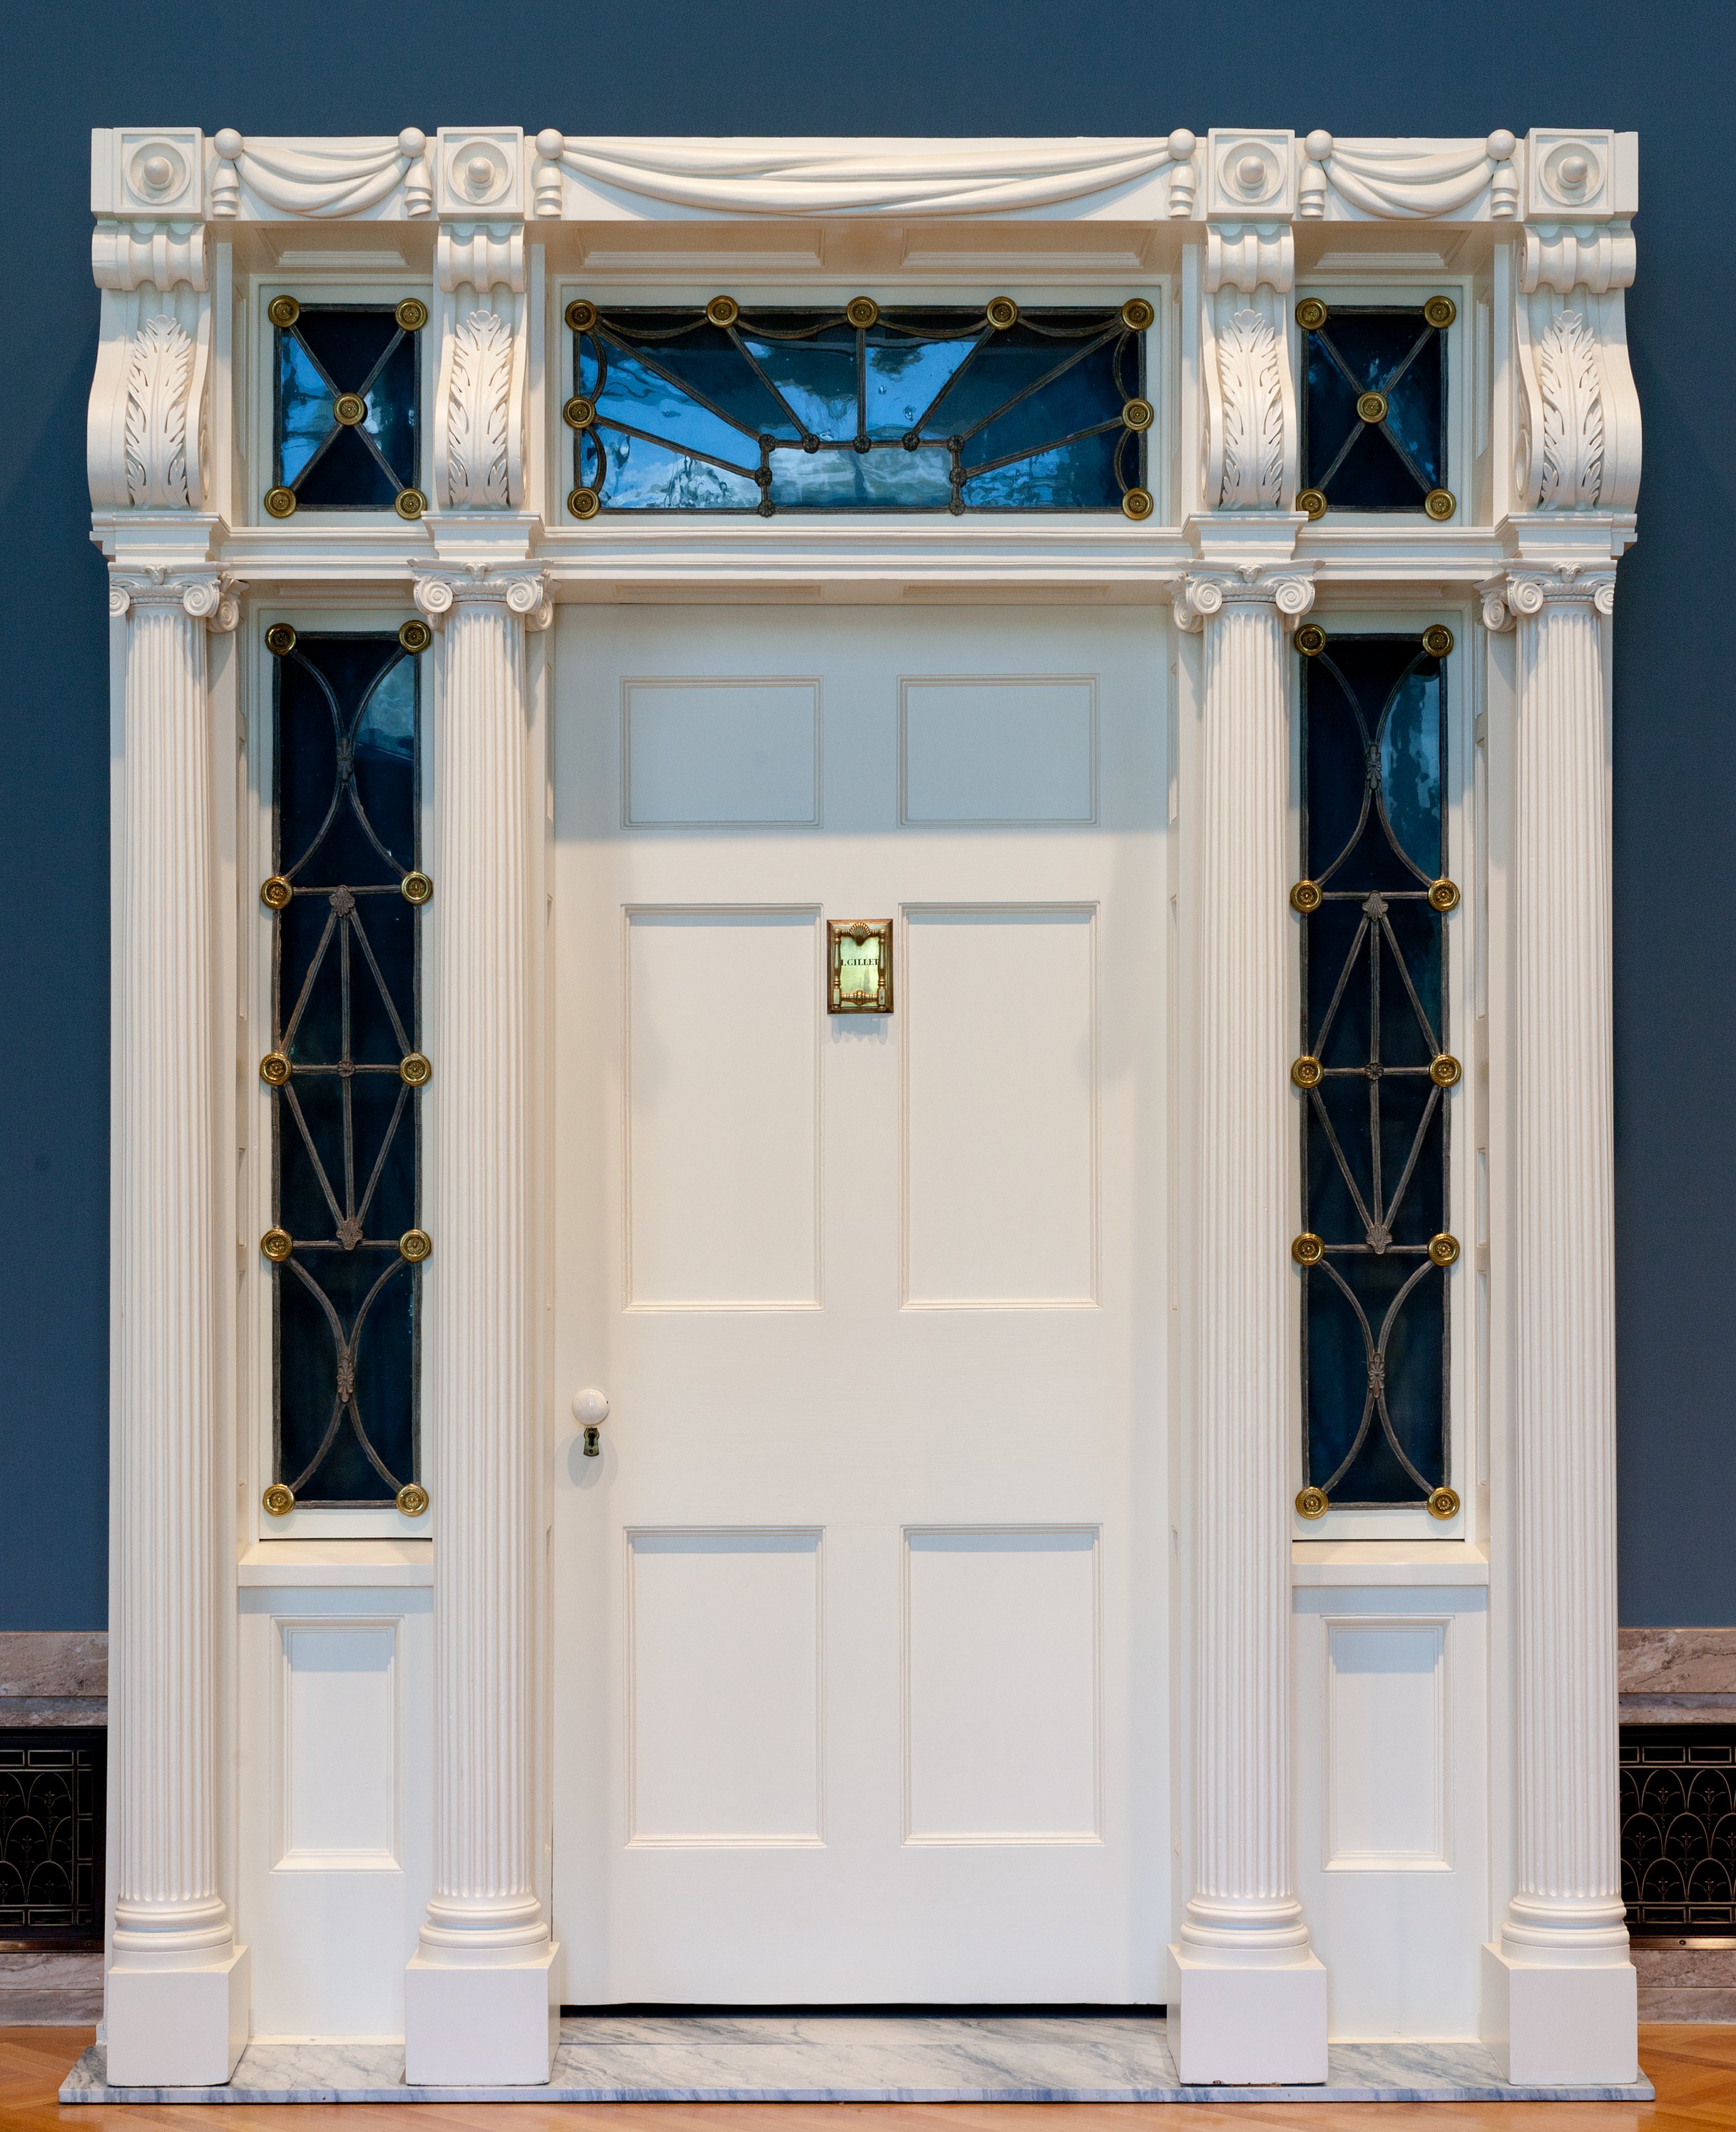 Doorway from the Isaac Gillet House, Painesville, Ohio